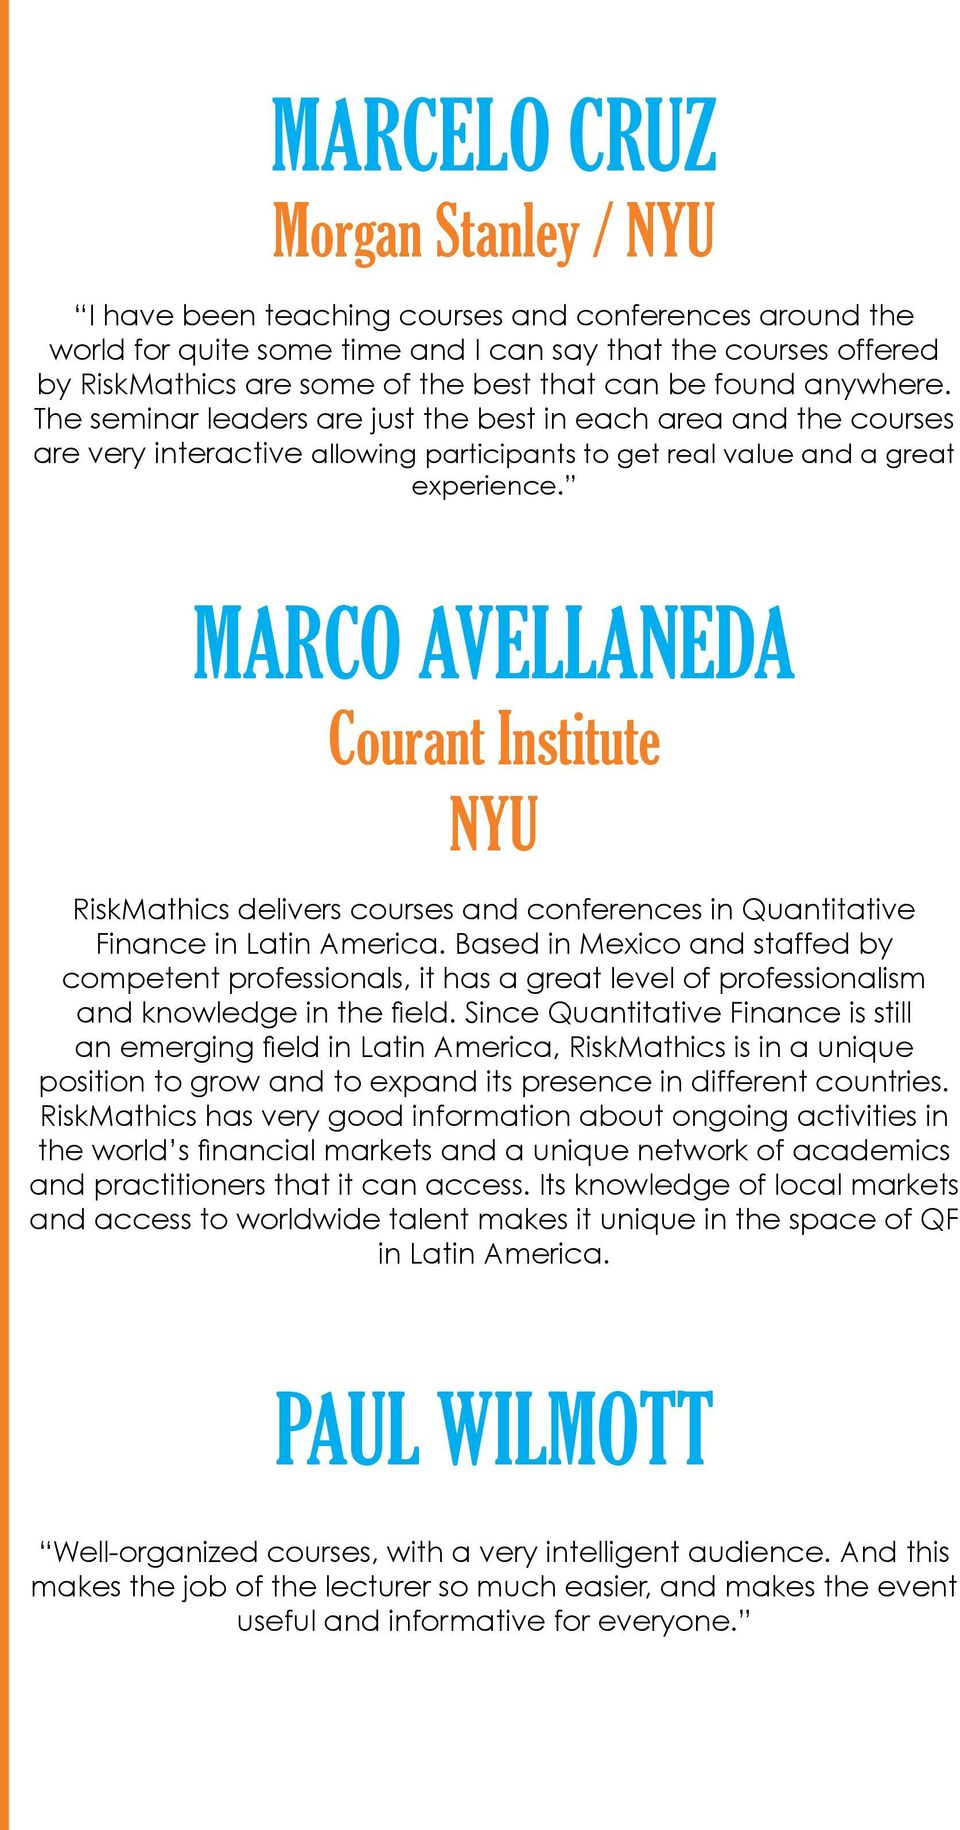 Marco Avellaneda Courant Institute NYU RiskMathics delivers courses and conferences in Quantitative Finance in Latin America.